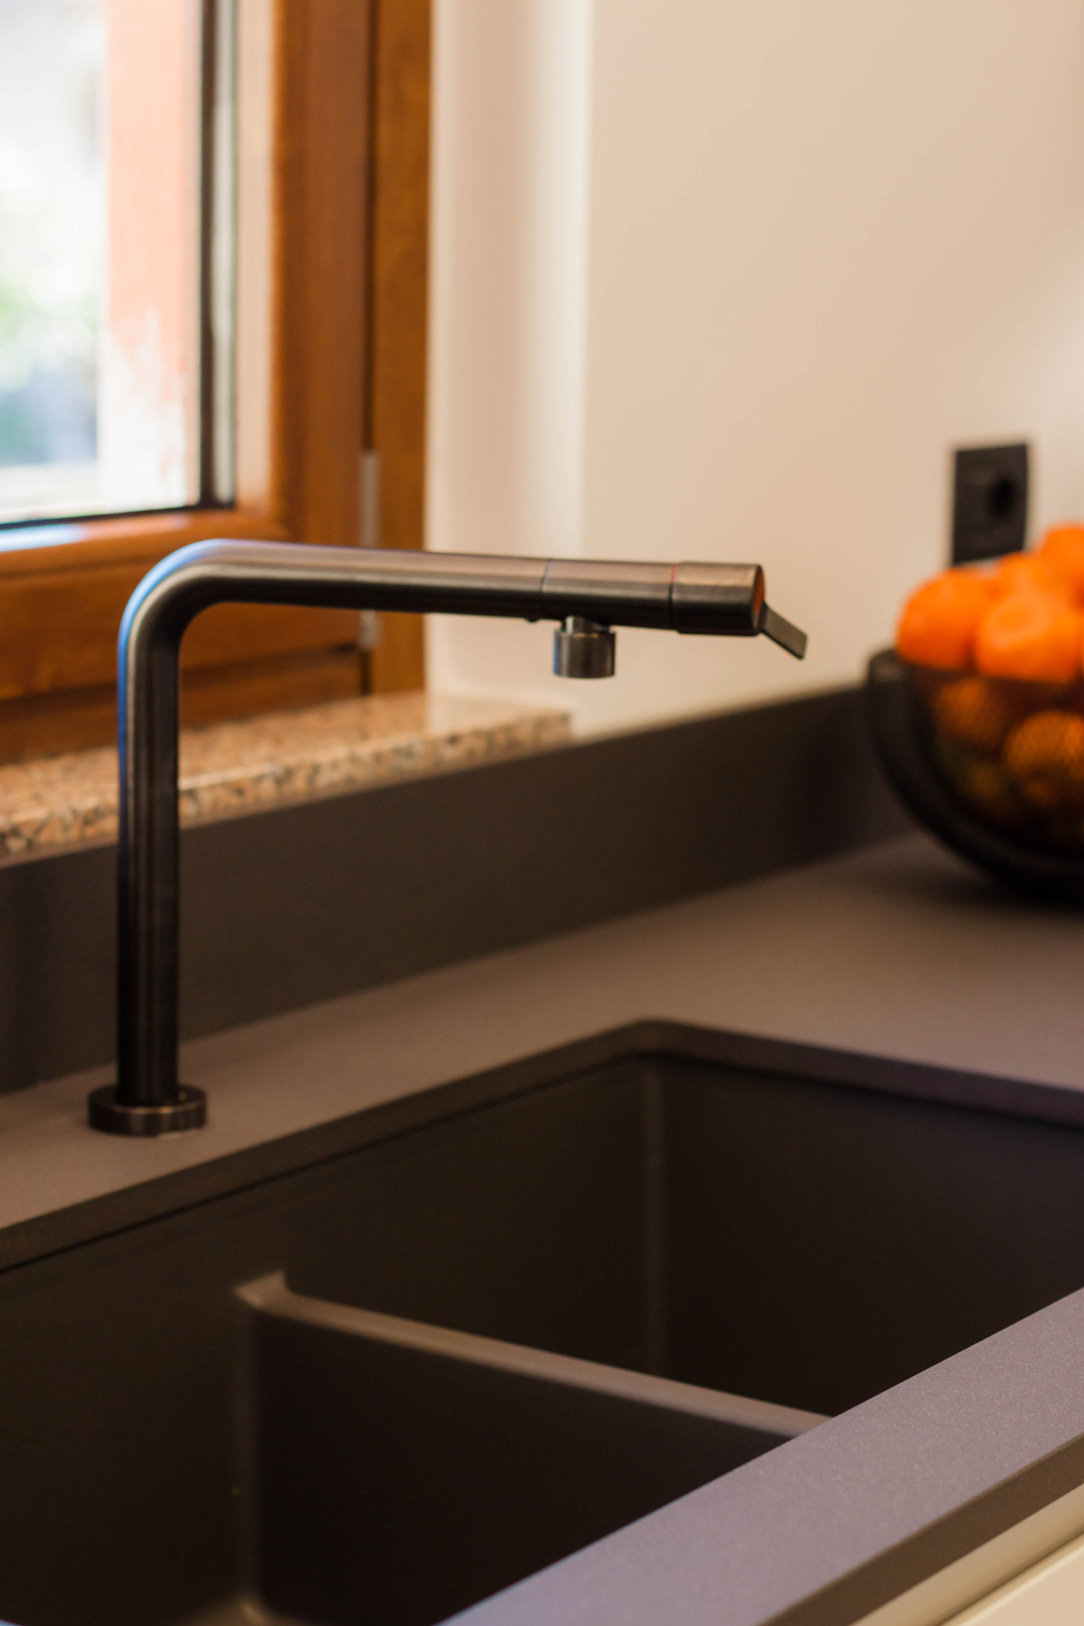 materials and colours Lapitec top anthracite grey undermount sink